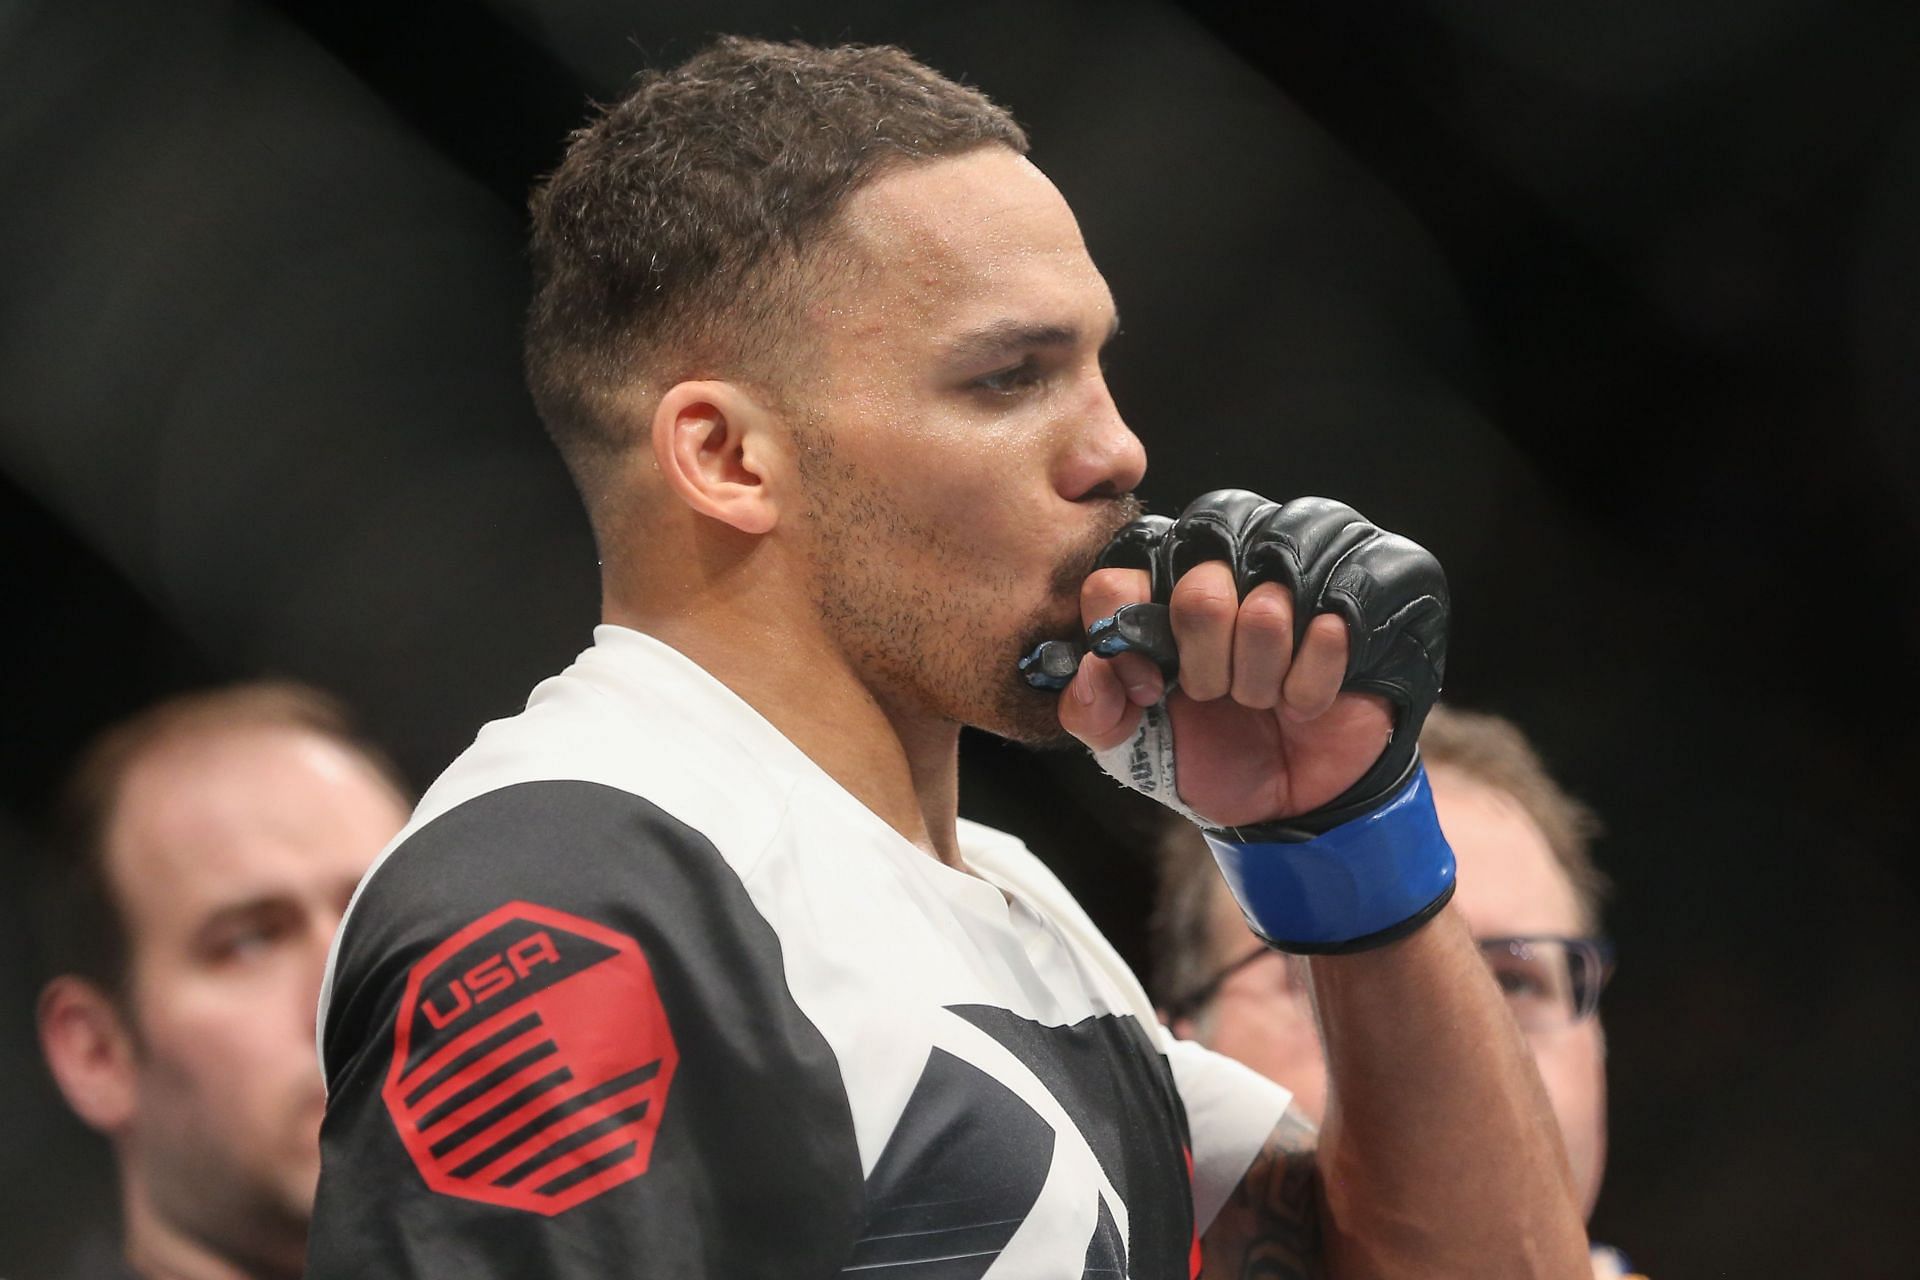 Eryk Anders lost money betting on himself to beat Jun Yong Park in 2022